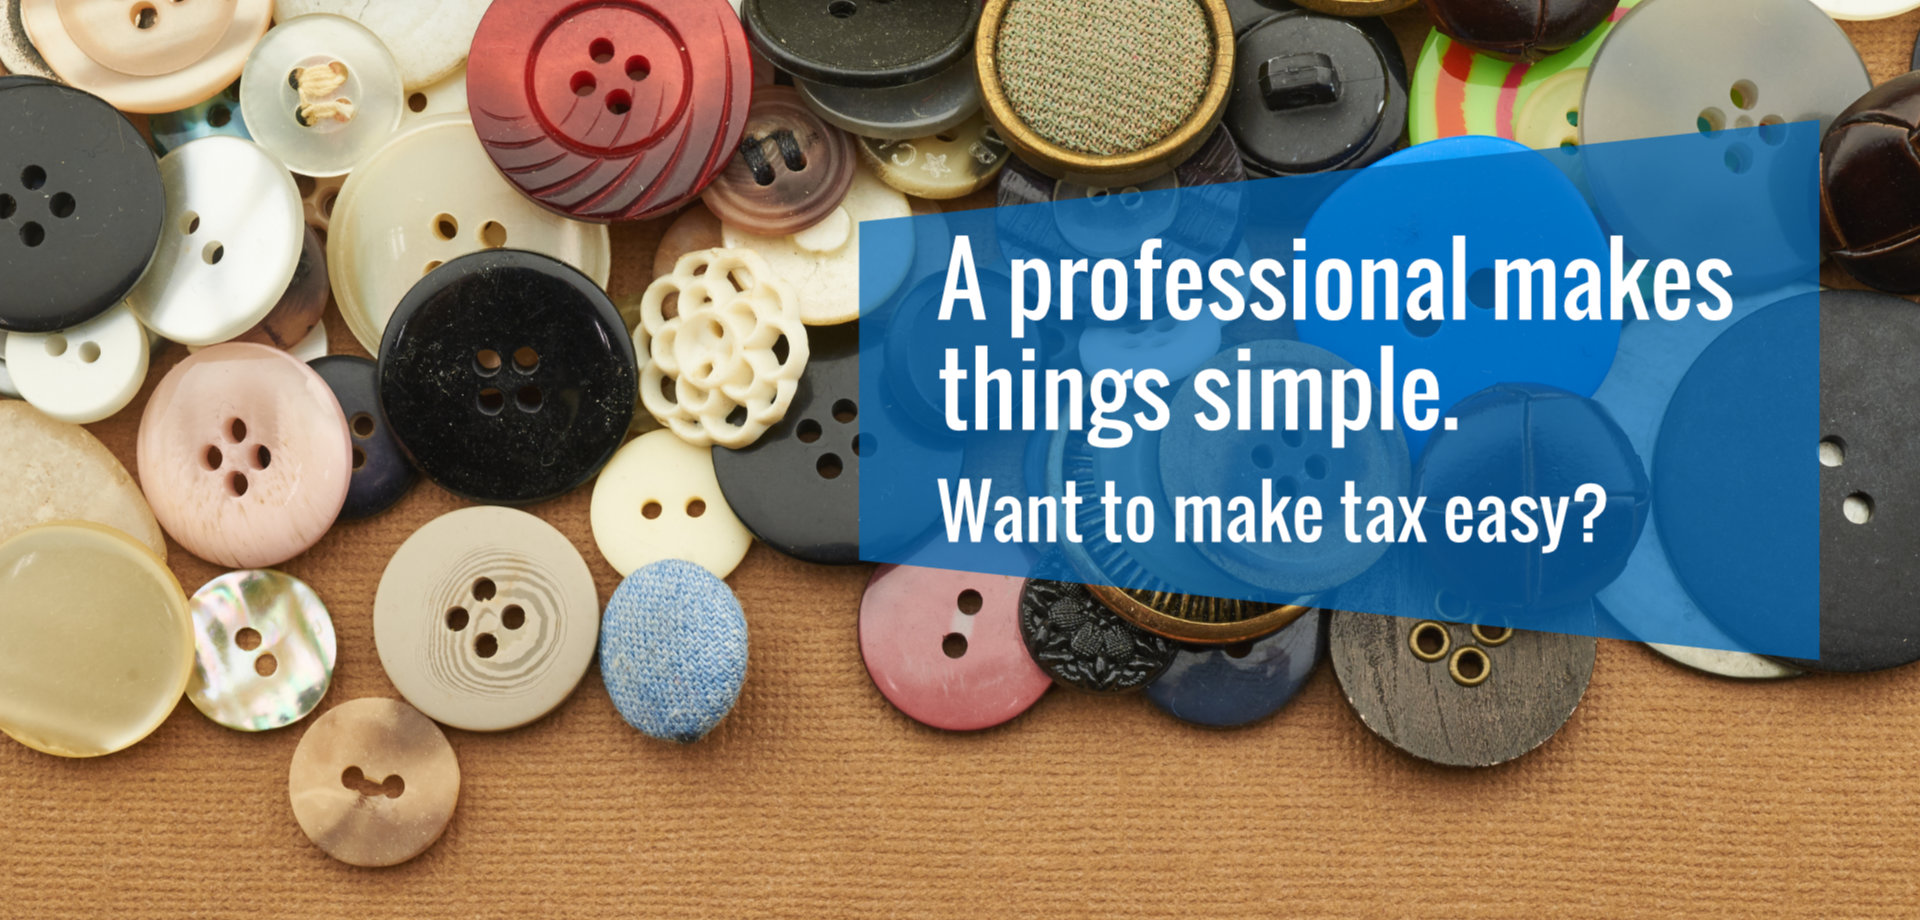 A professional makes things simple. Want to make tax easy?